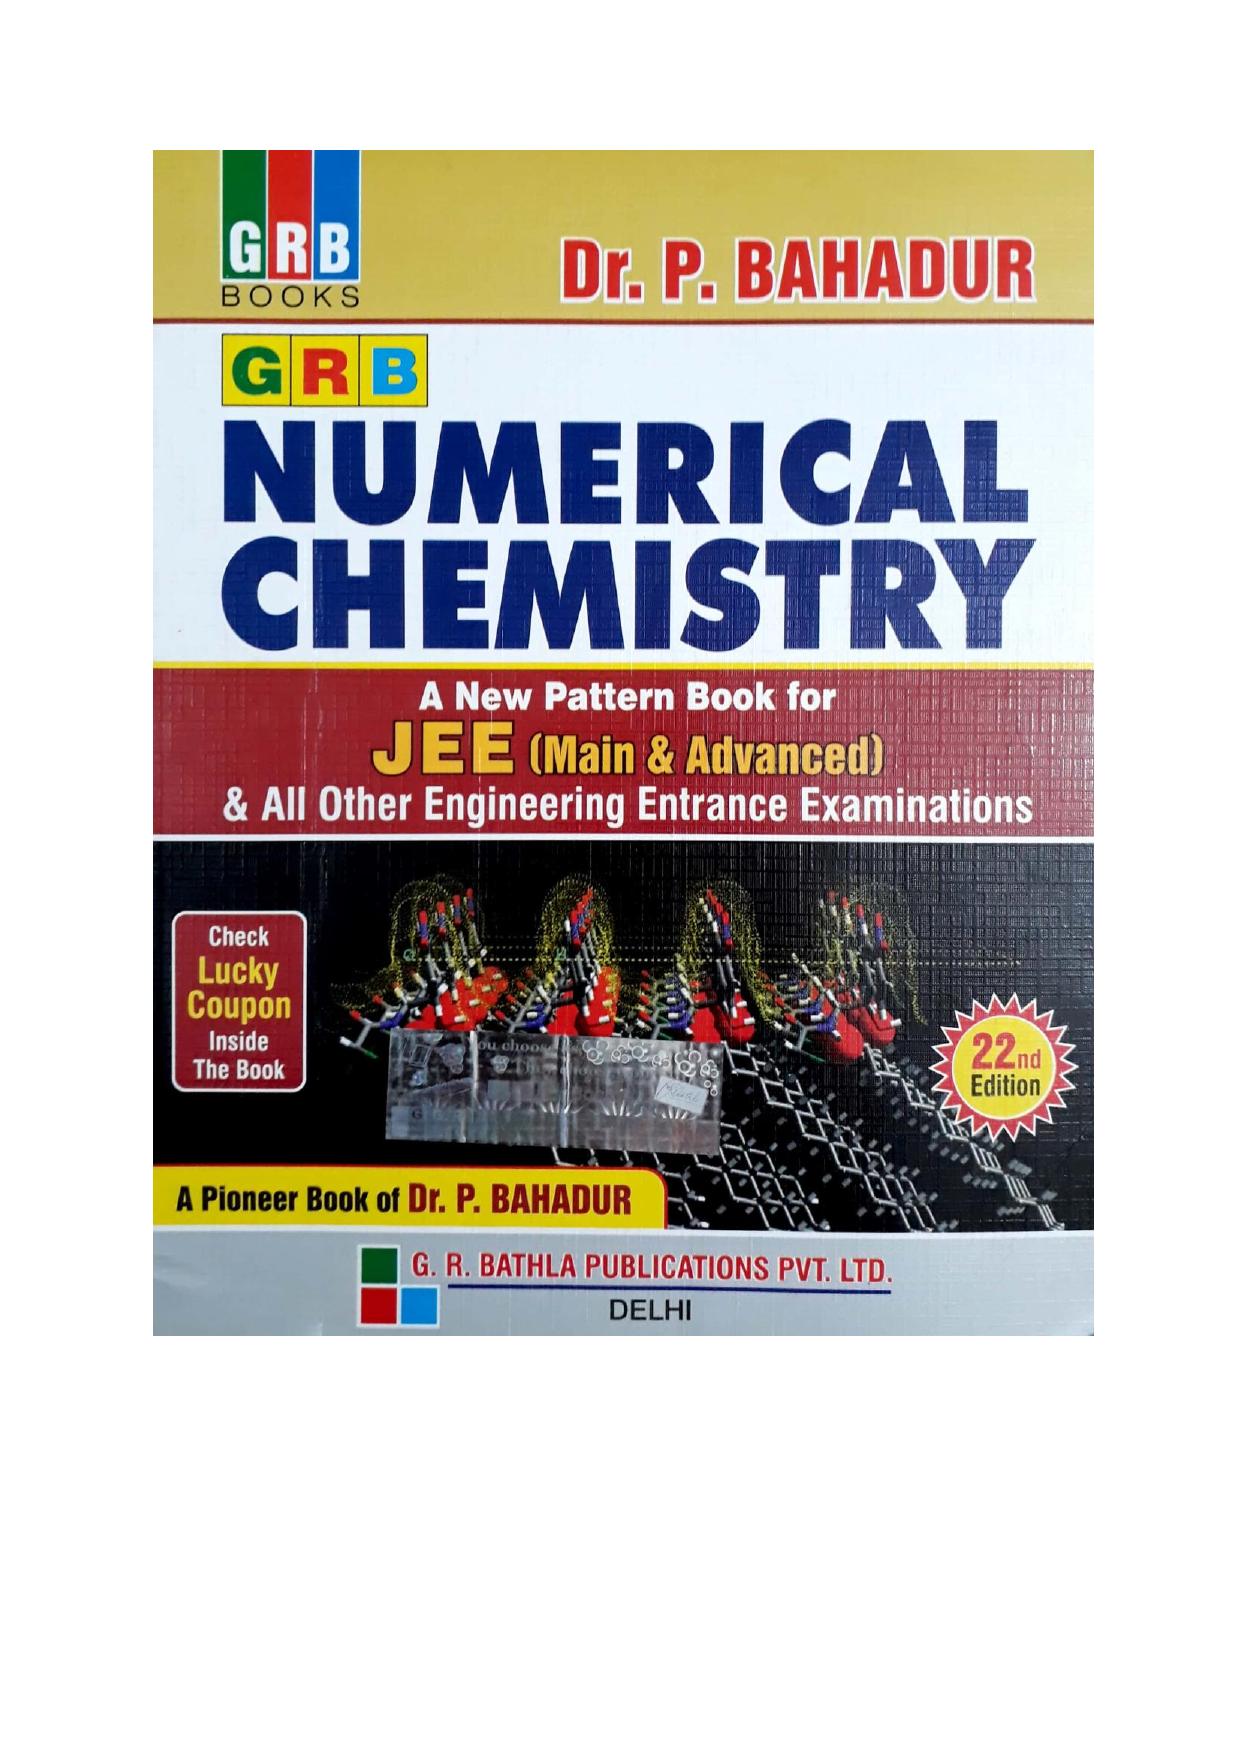 (IIT JEE) Dr. P Bahadur-GRB Numerical Chemistry Chapter 9 to 17 for IIT JEE and Other Engineering Entrance Exams by Dr. P Bahadur-GRB (2018) by Baba